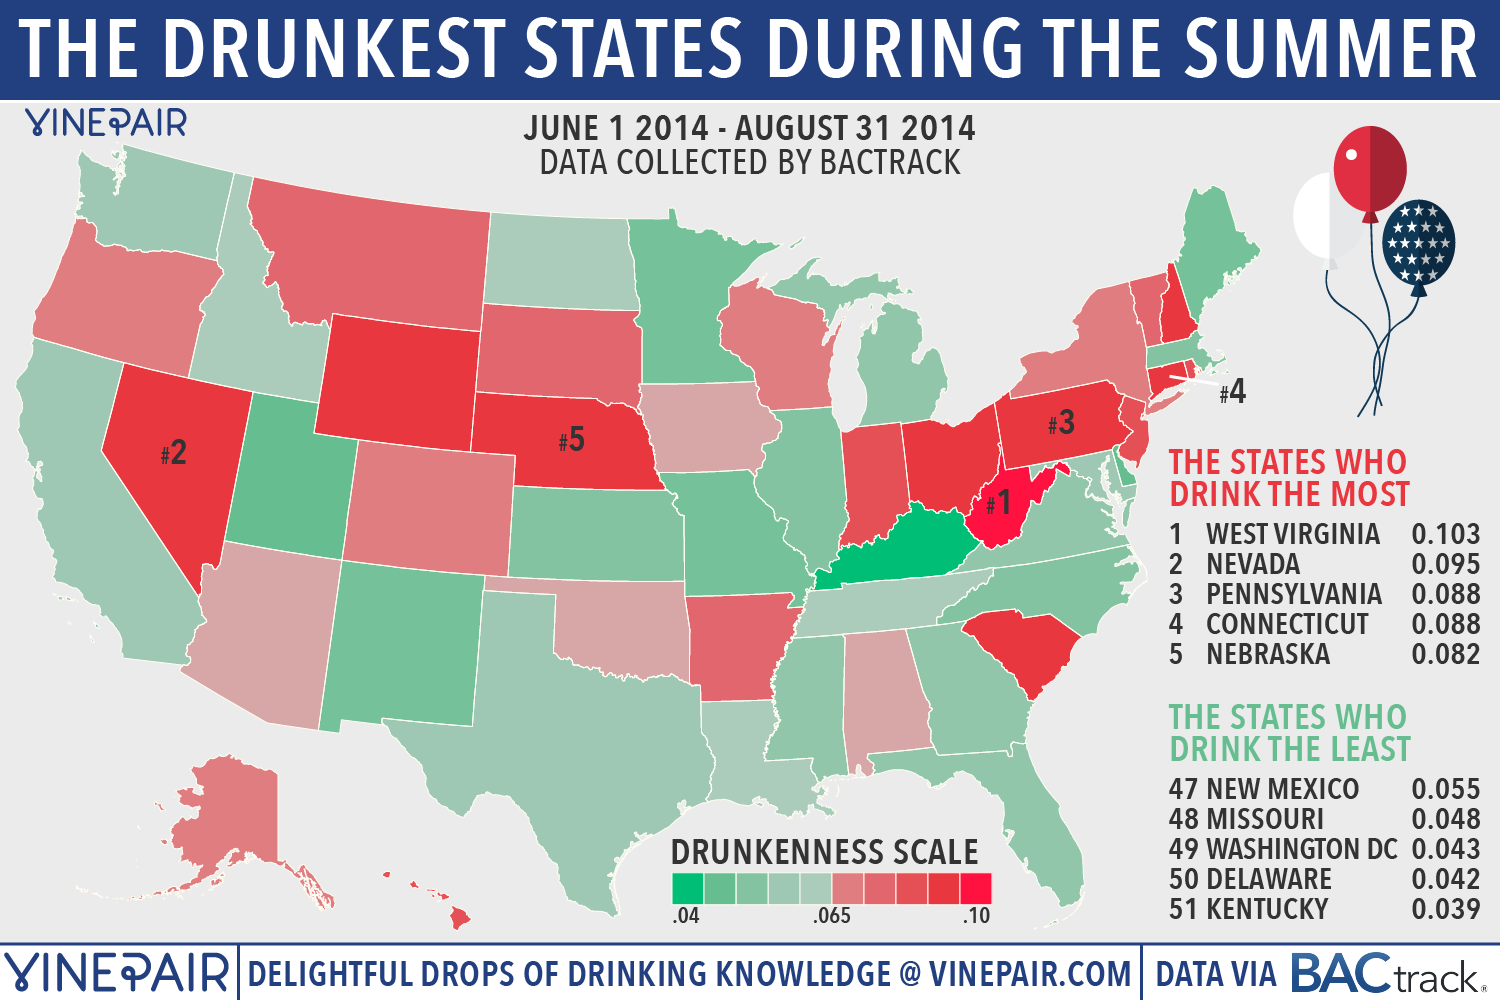 The Drunkest States During The Summer